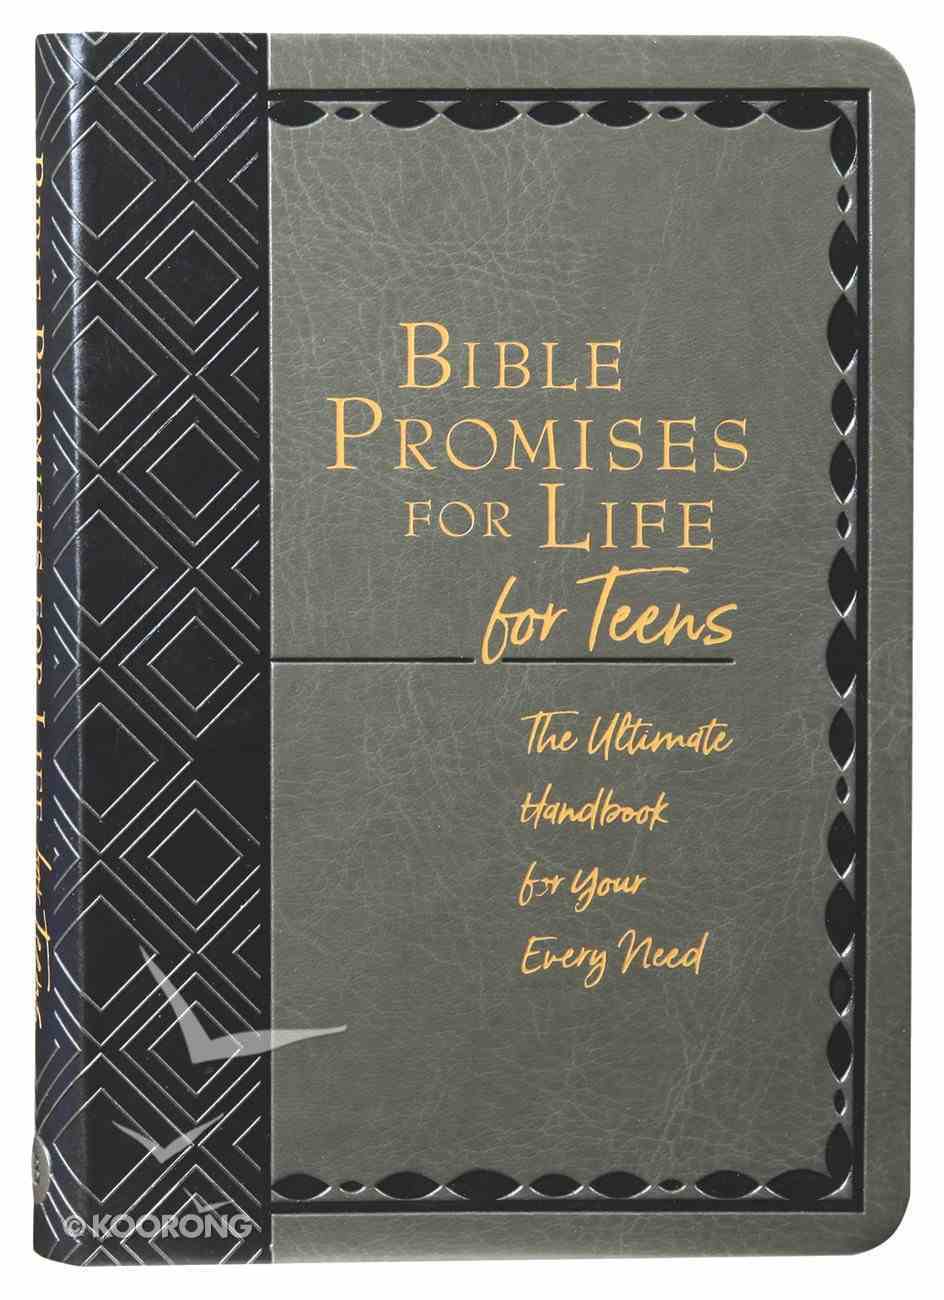 Bible Promises For Life: The Ultimate Handbook For Your Every Need (For Teens) Imitation Leather